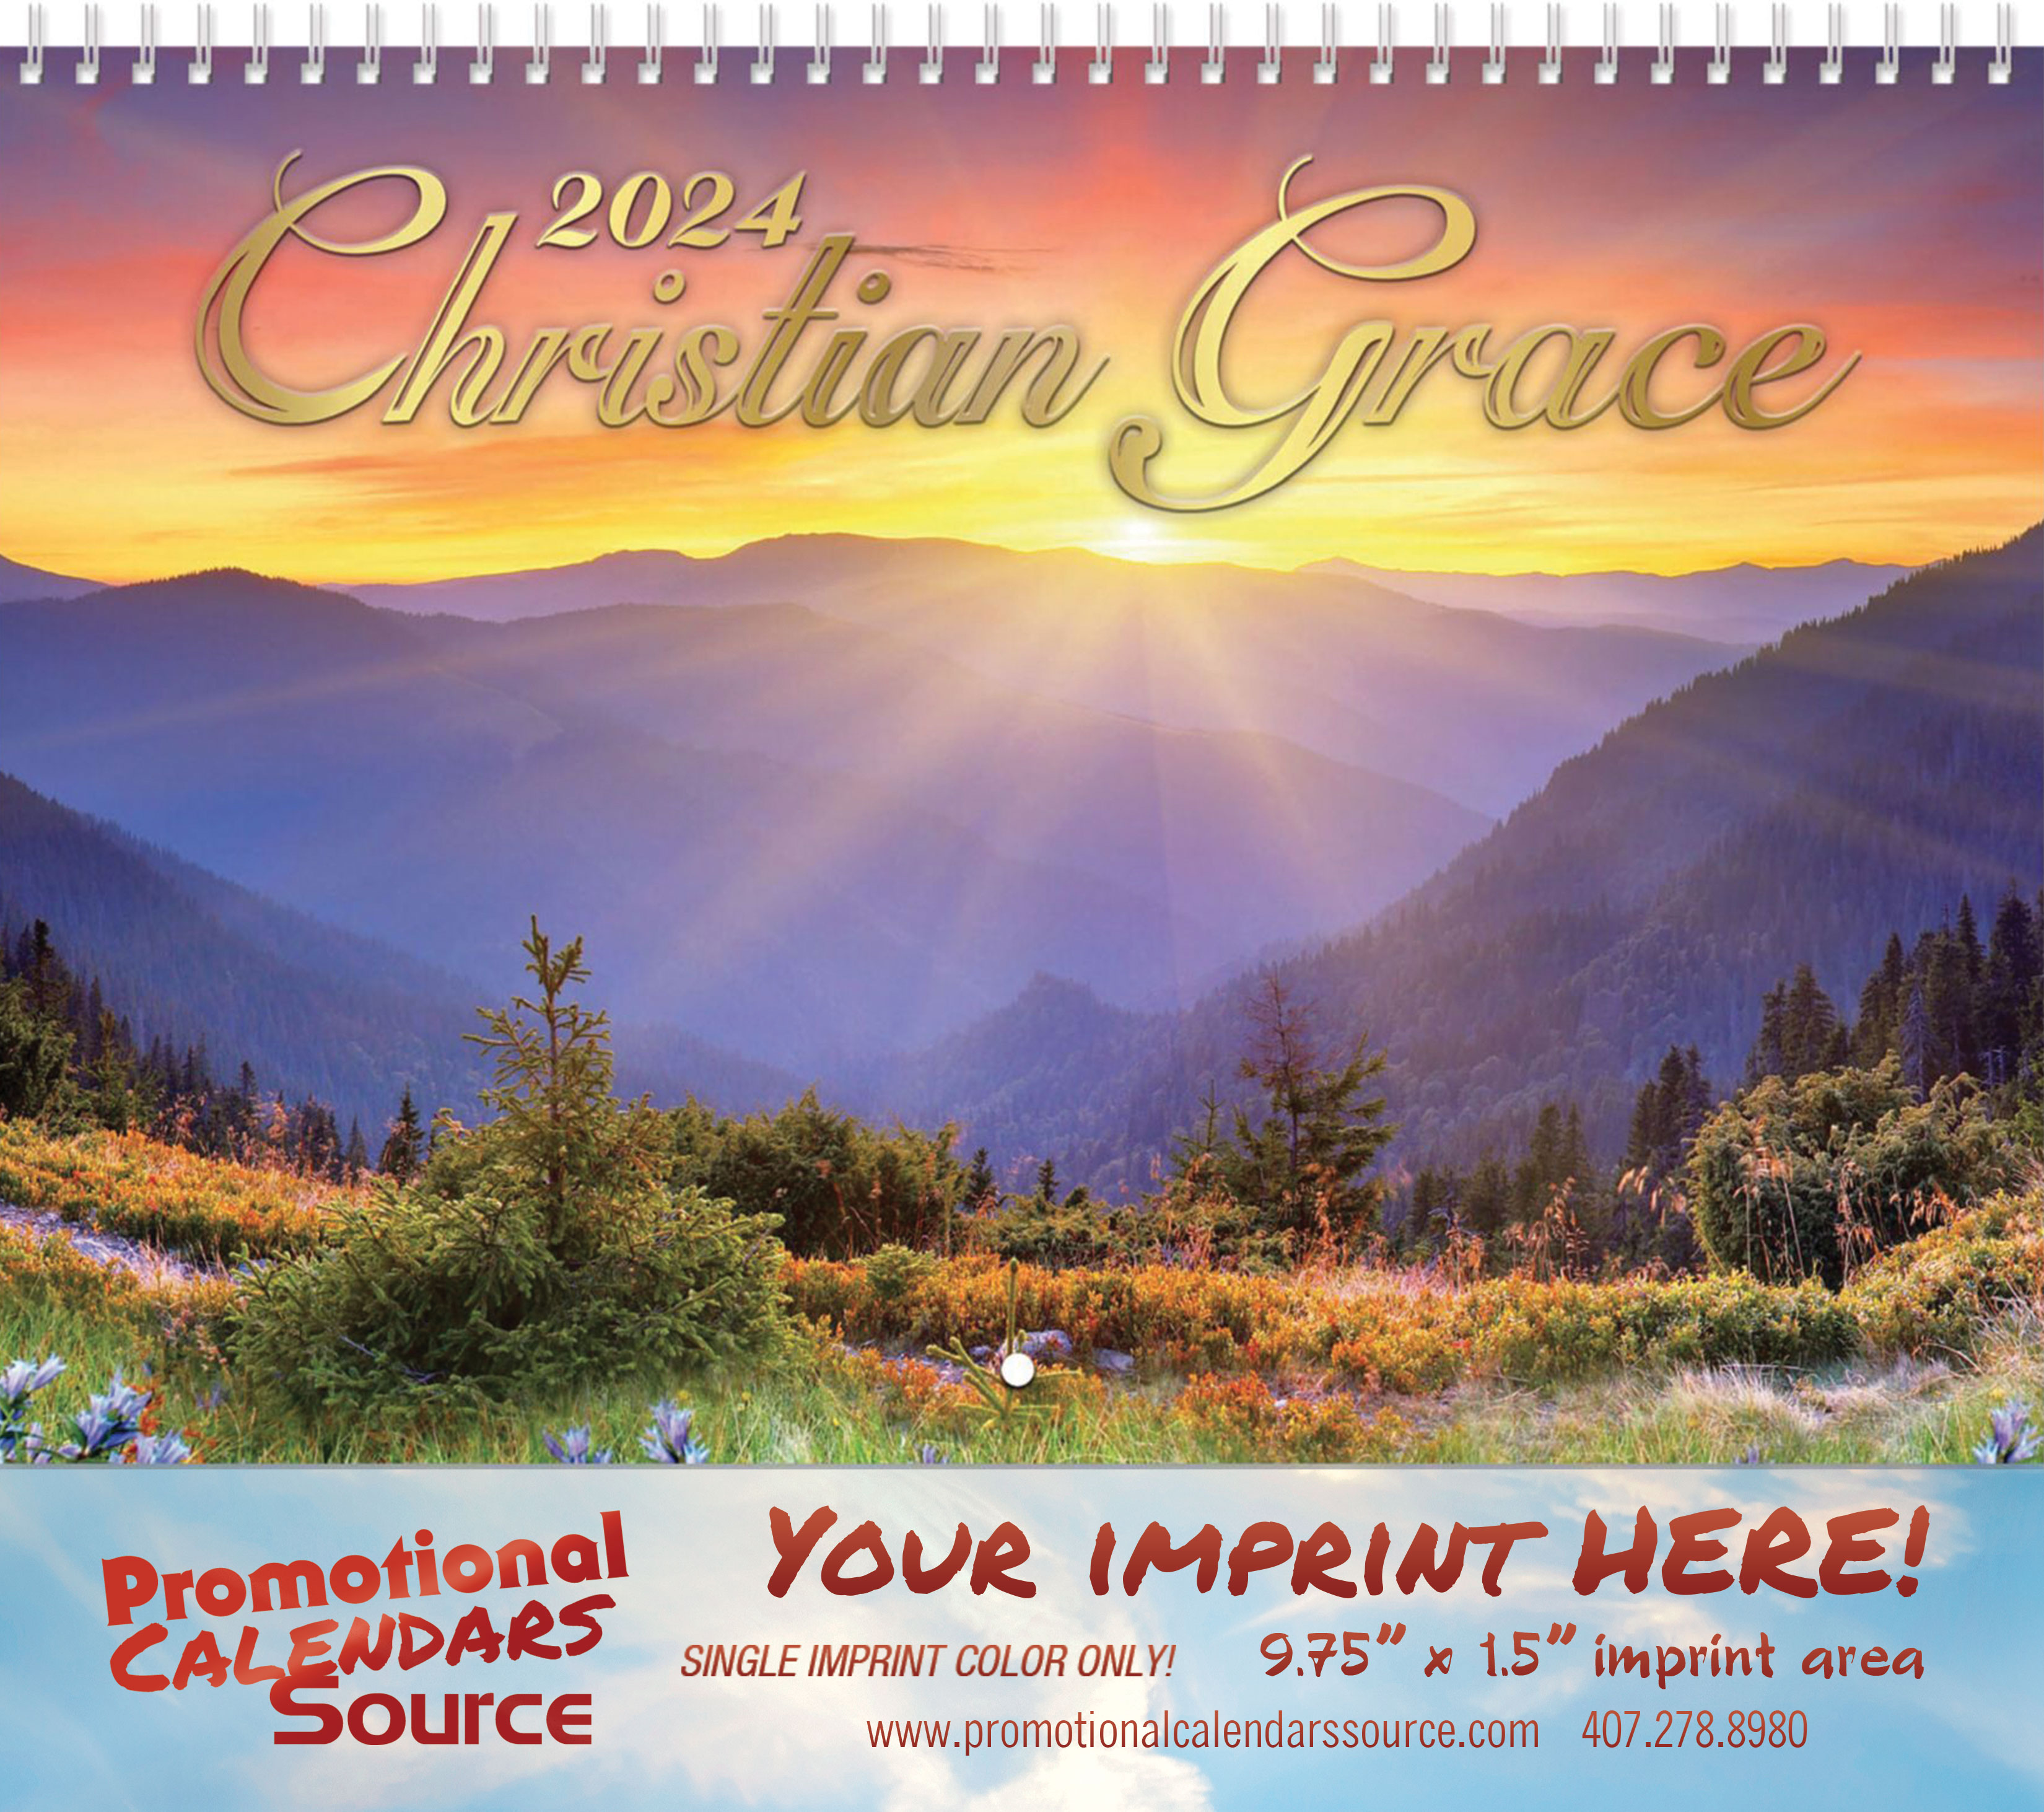 Christian Grace Spiral Wall Calendar With Metallic Foil Stamped Advertising Copy